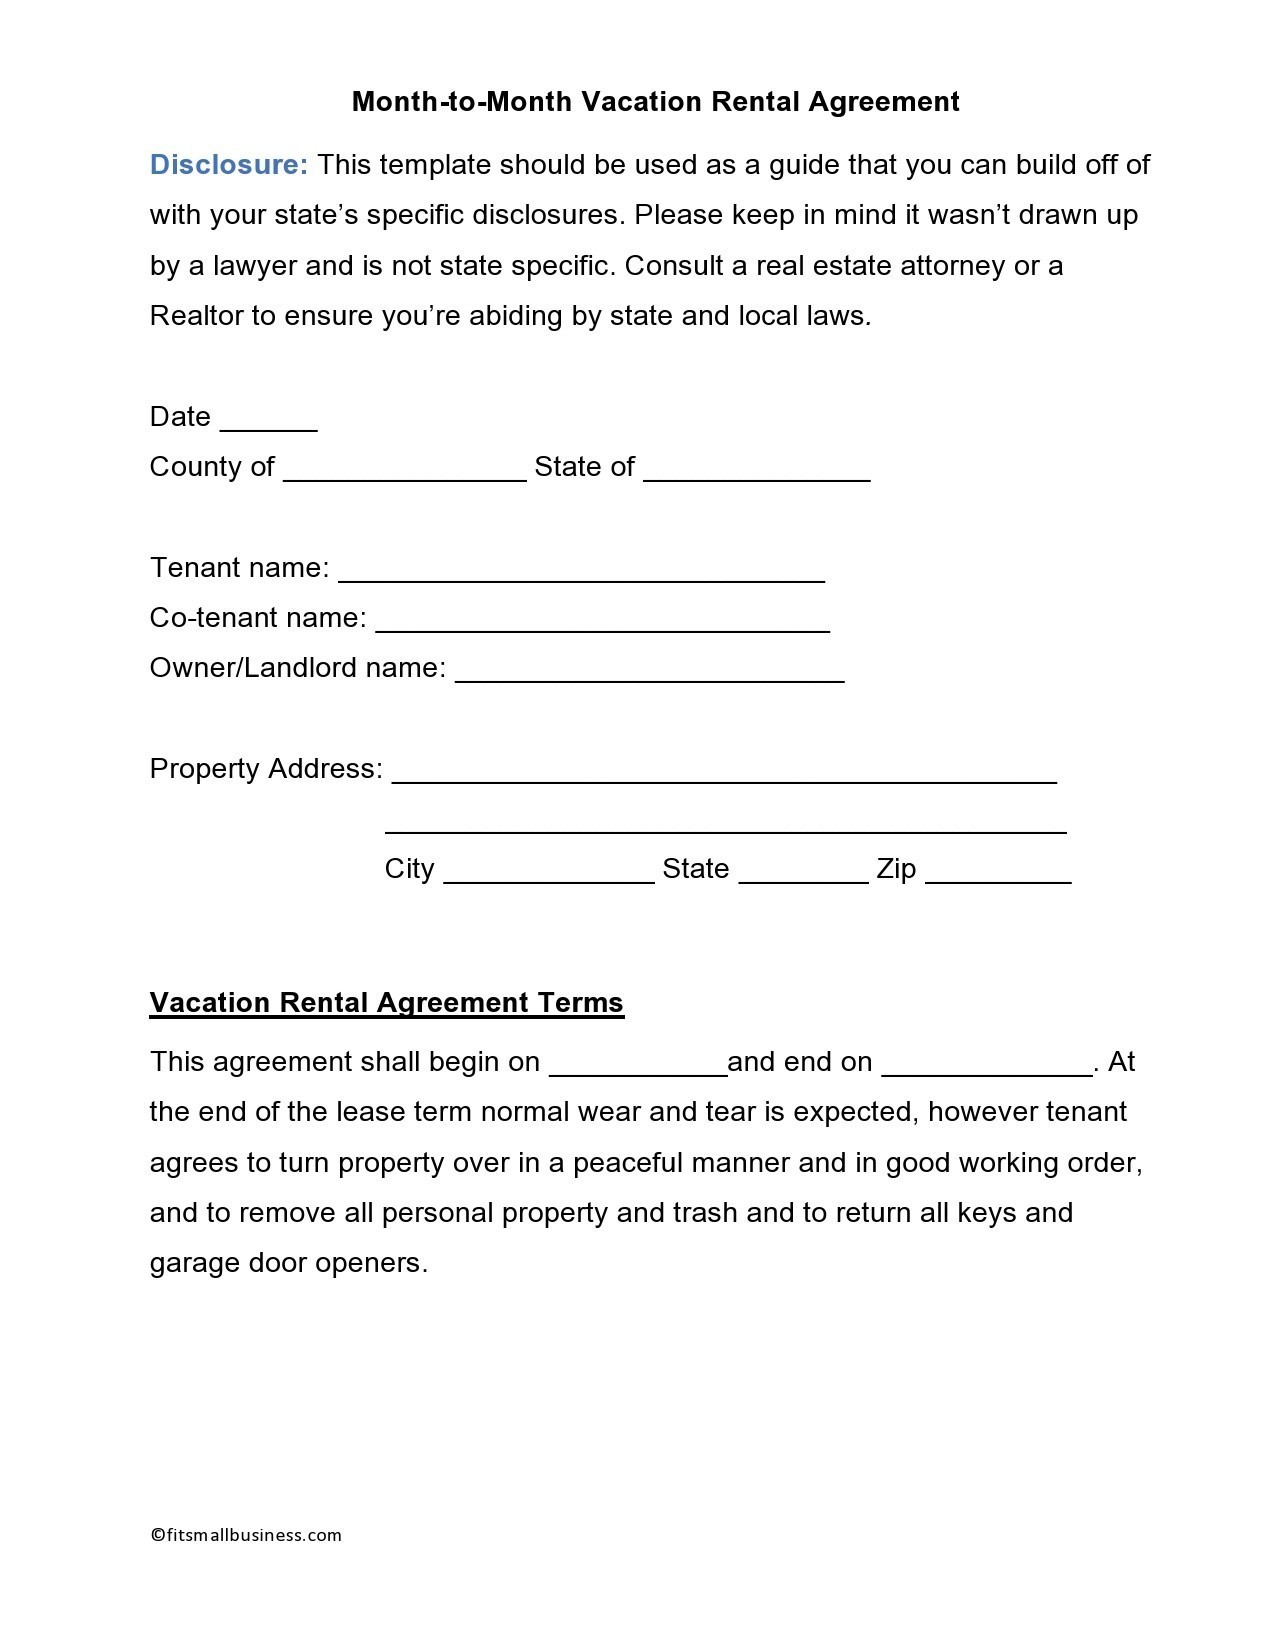 Free month to month rental agreement 12